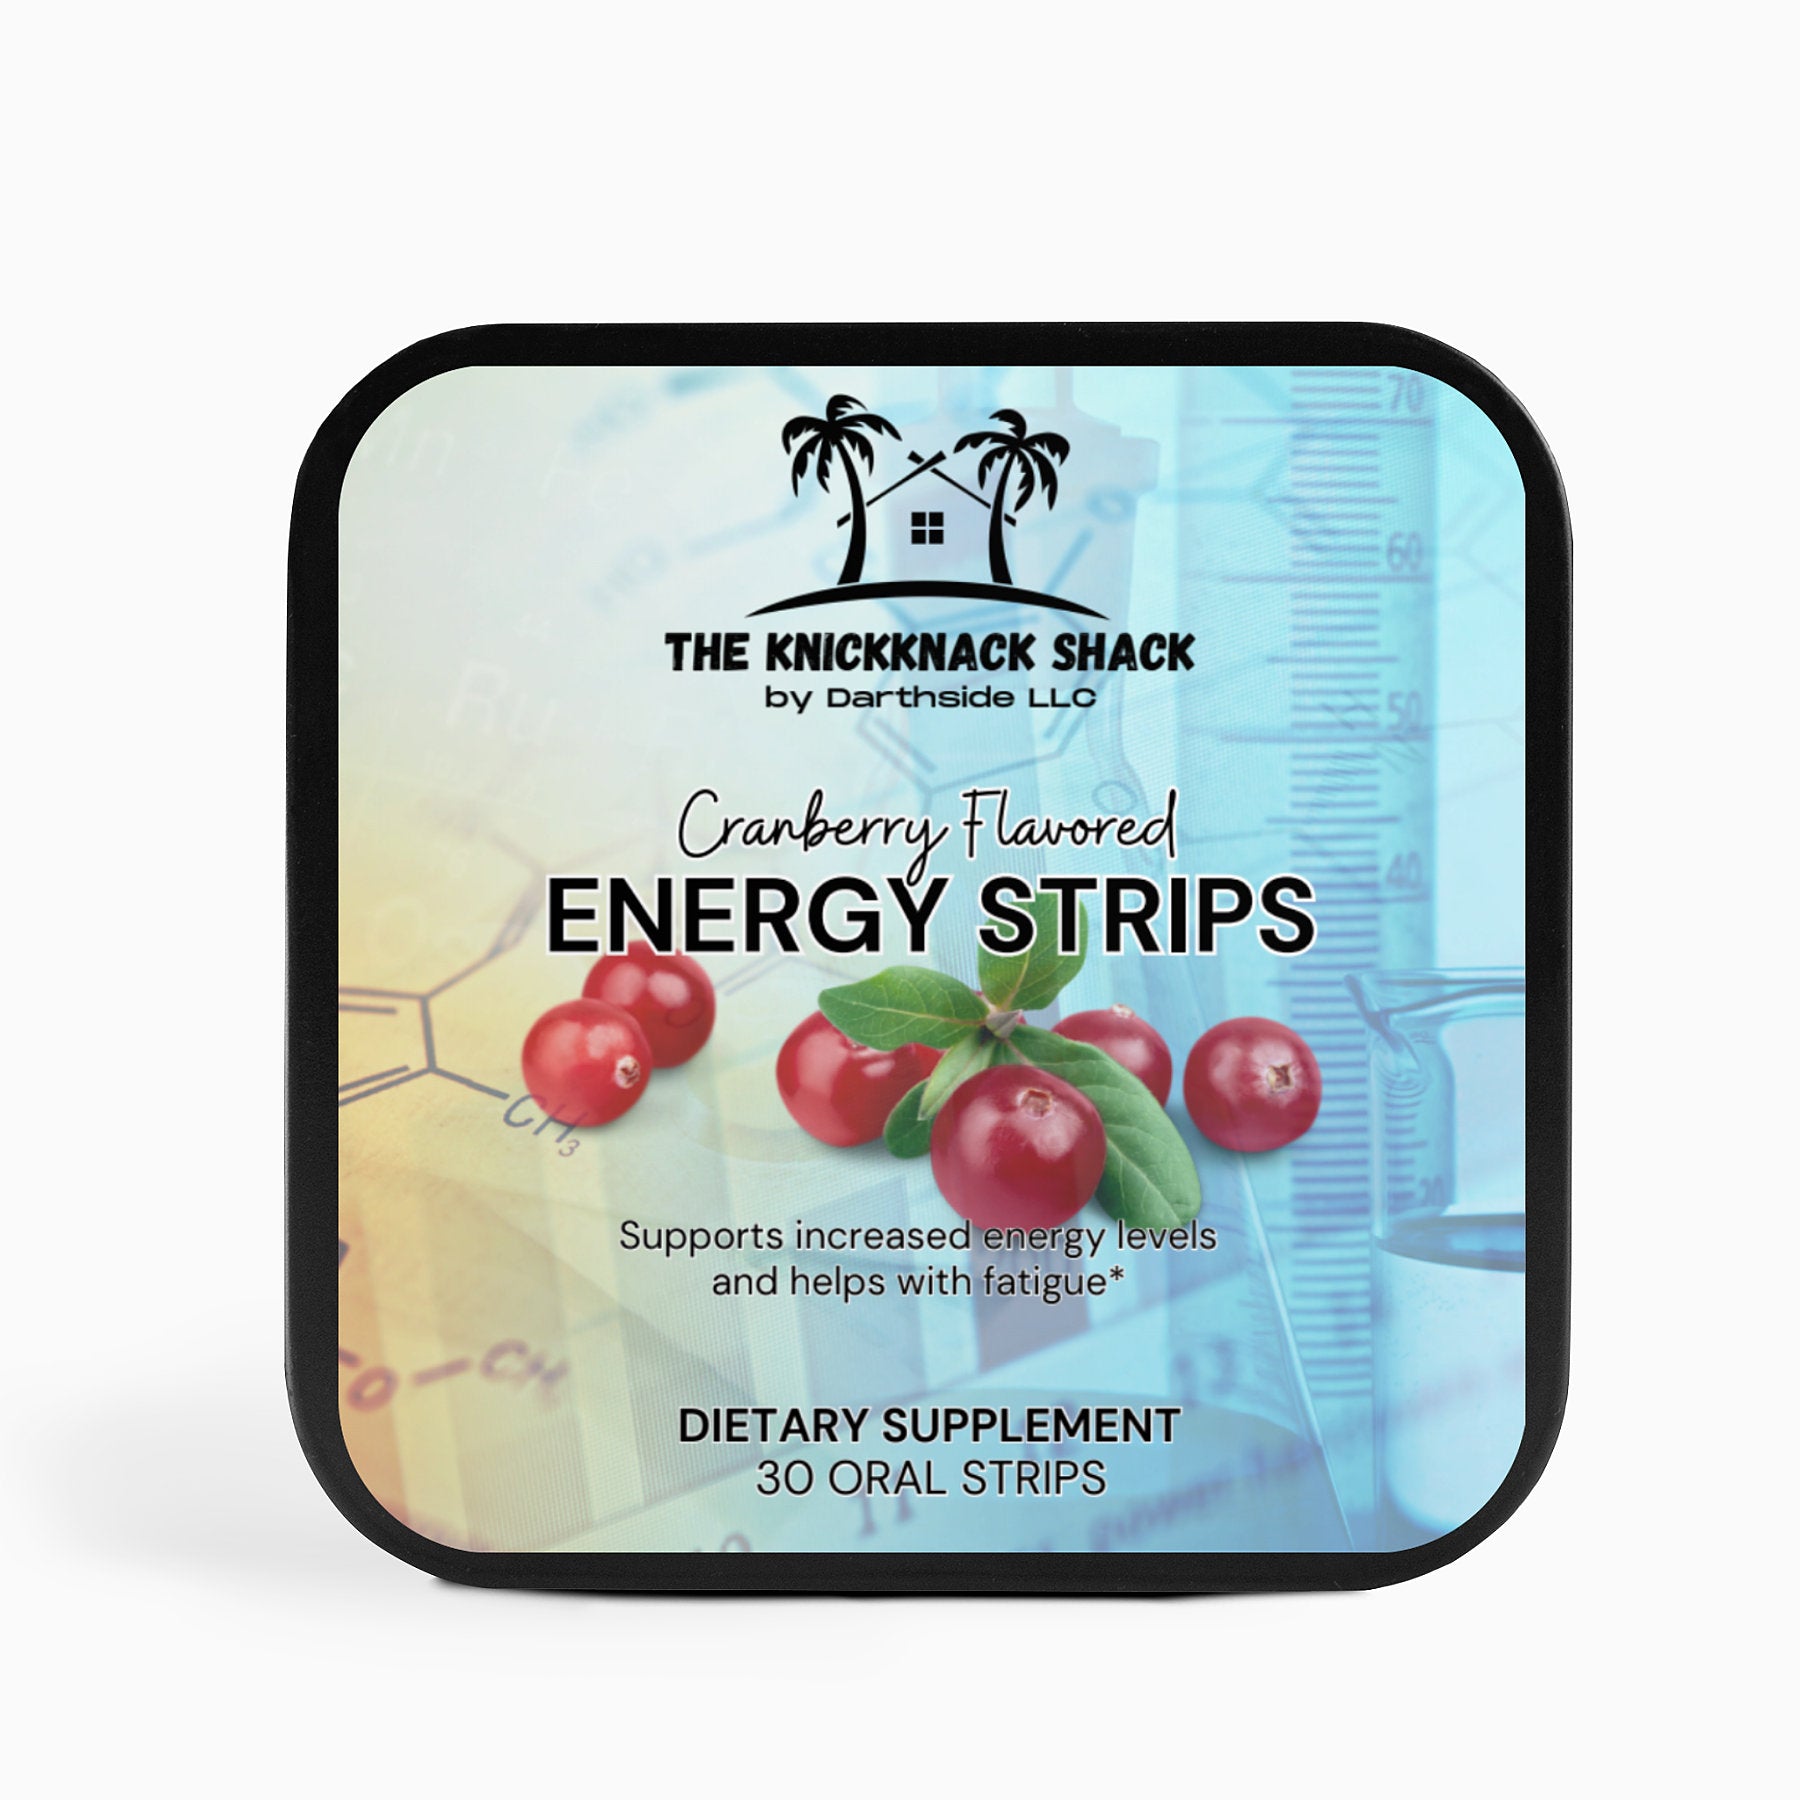 Cranberry Flavored Energy Strips